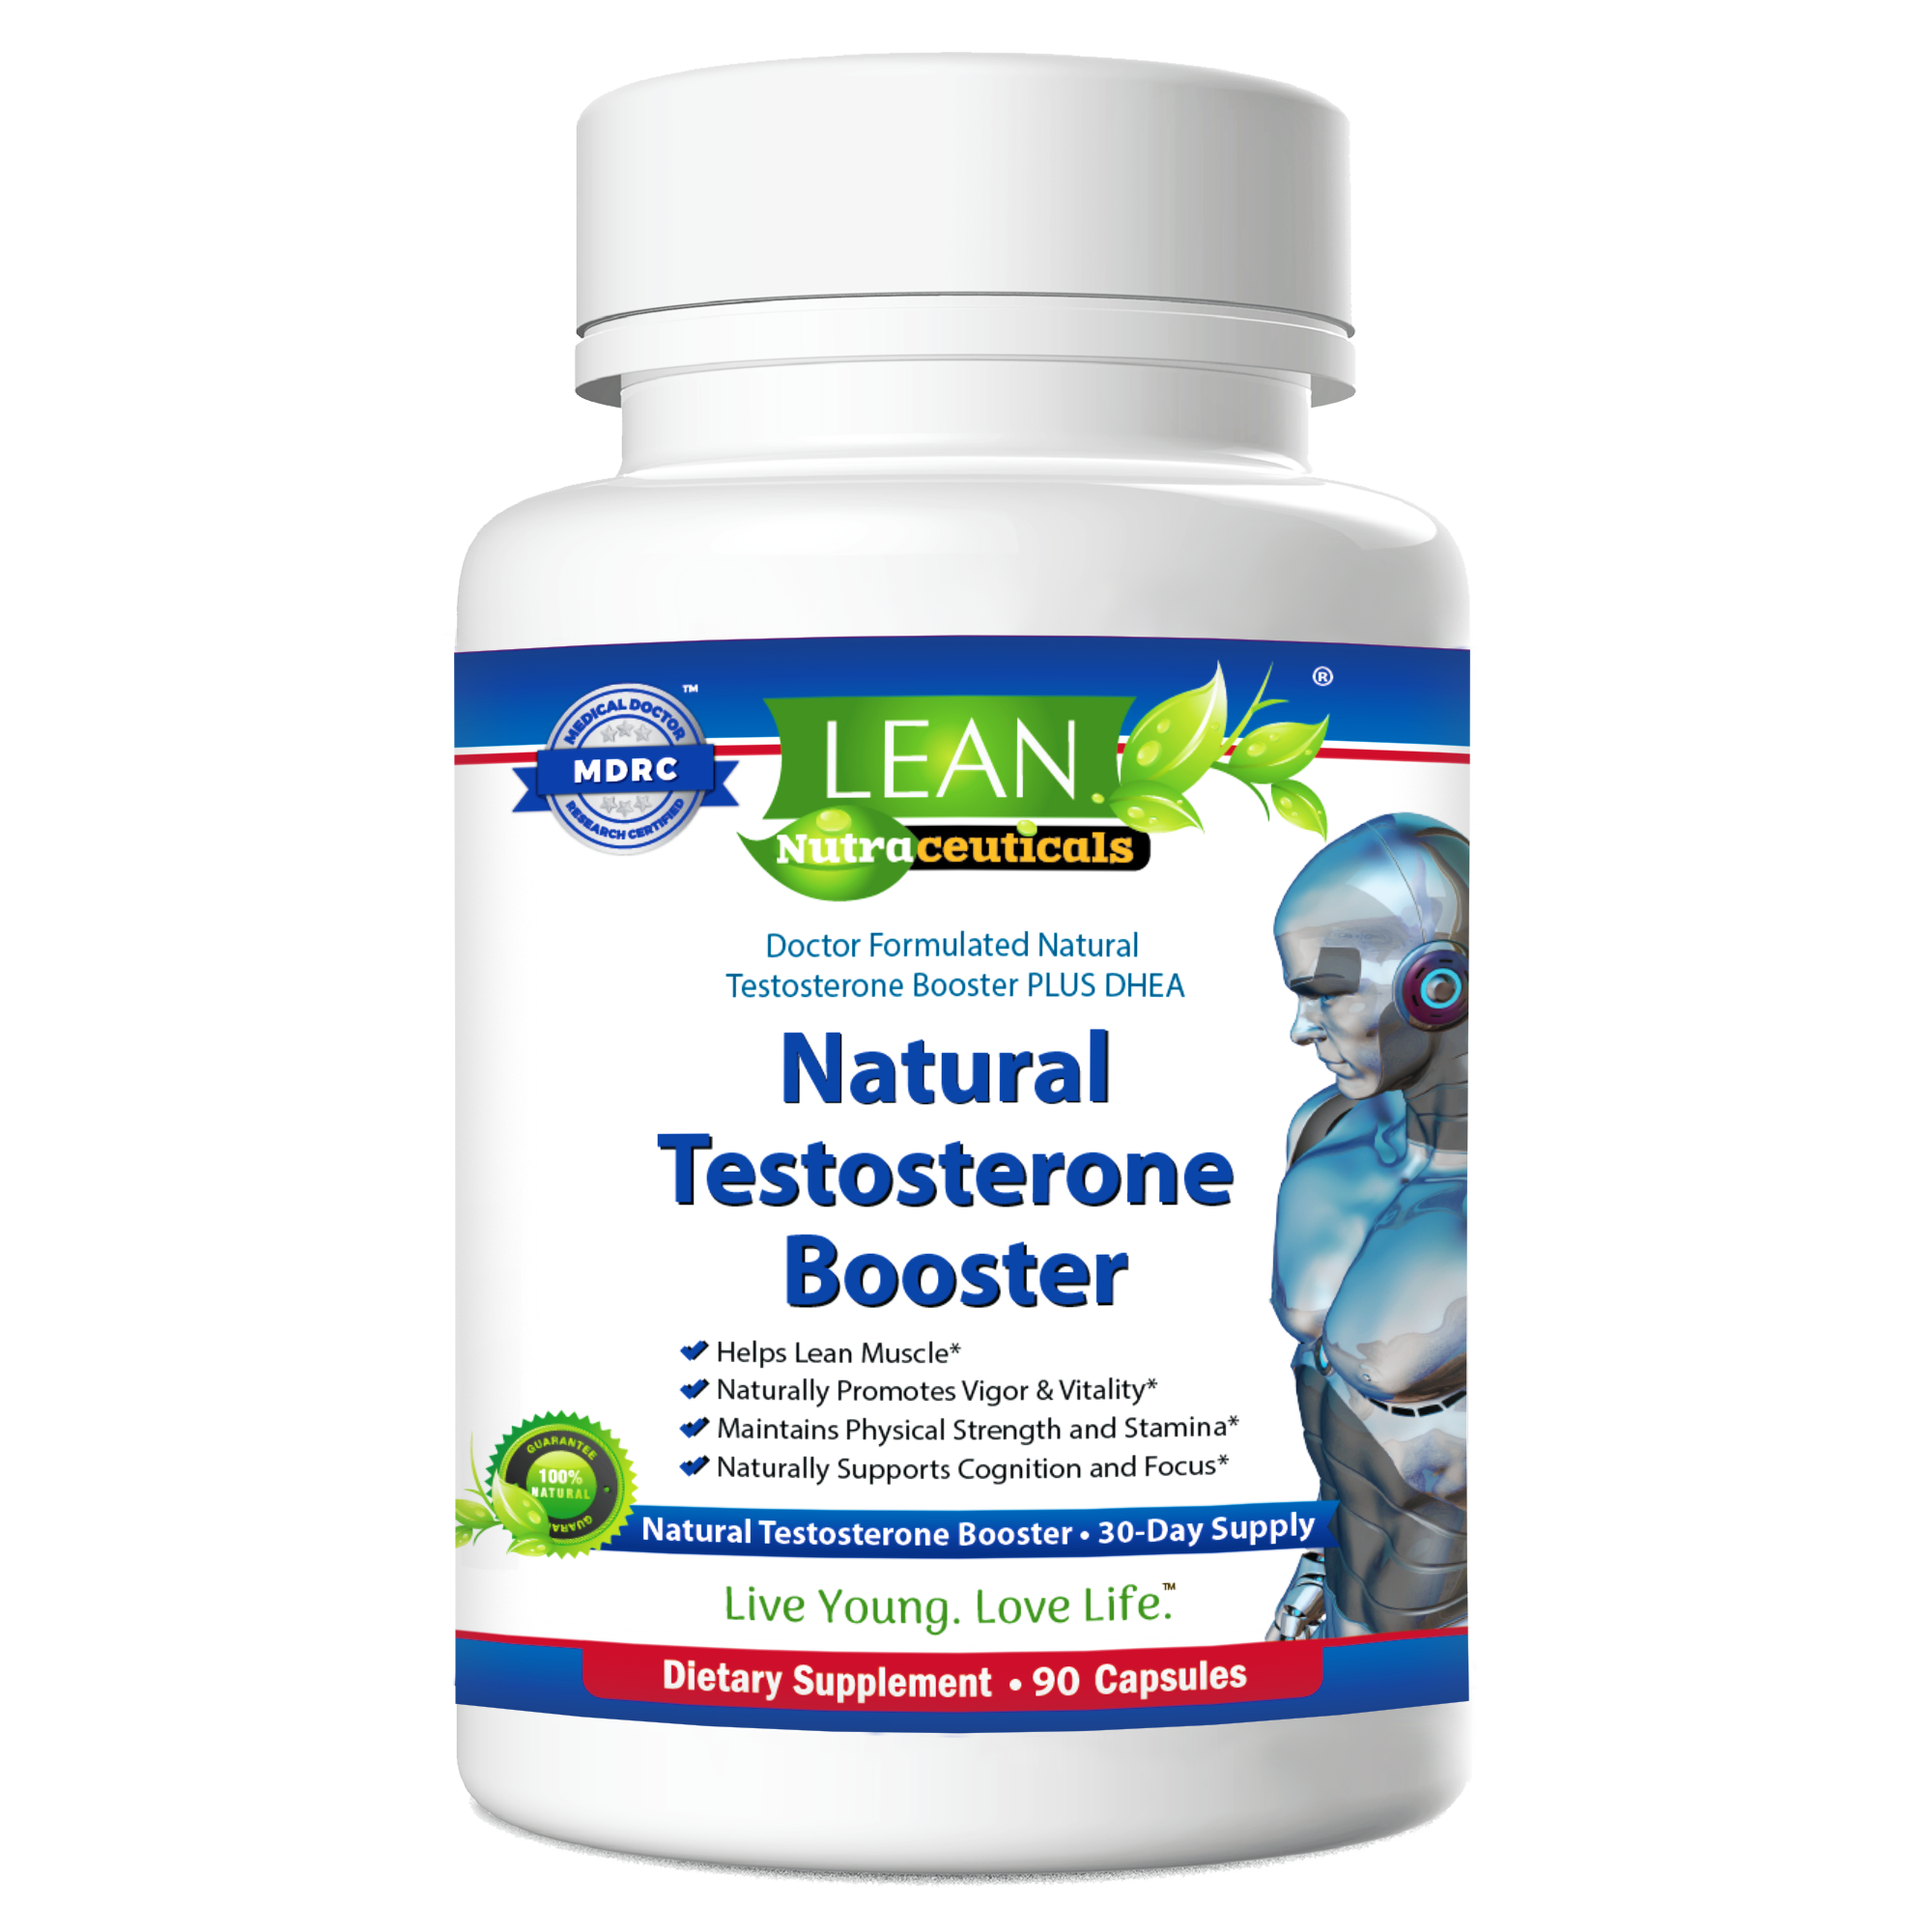 Lean Nutraceuticals Natural Testosterone Booster 90 Capsules Bottle Front